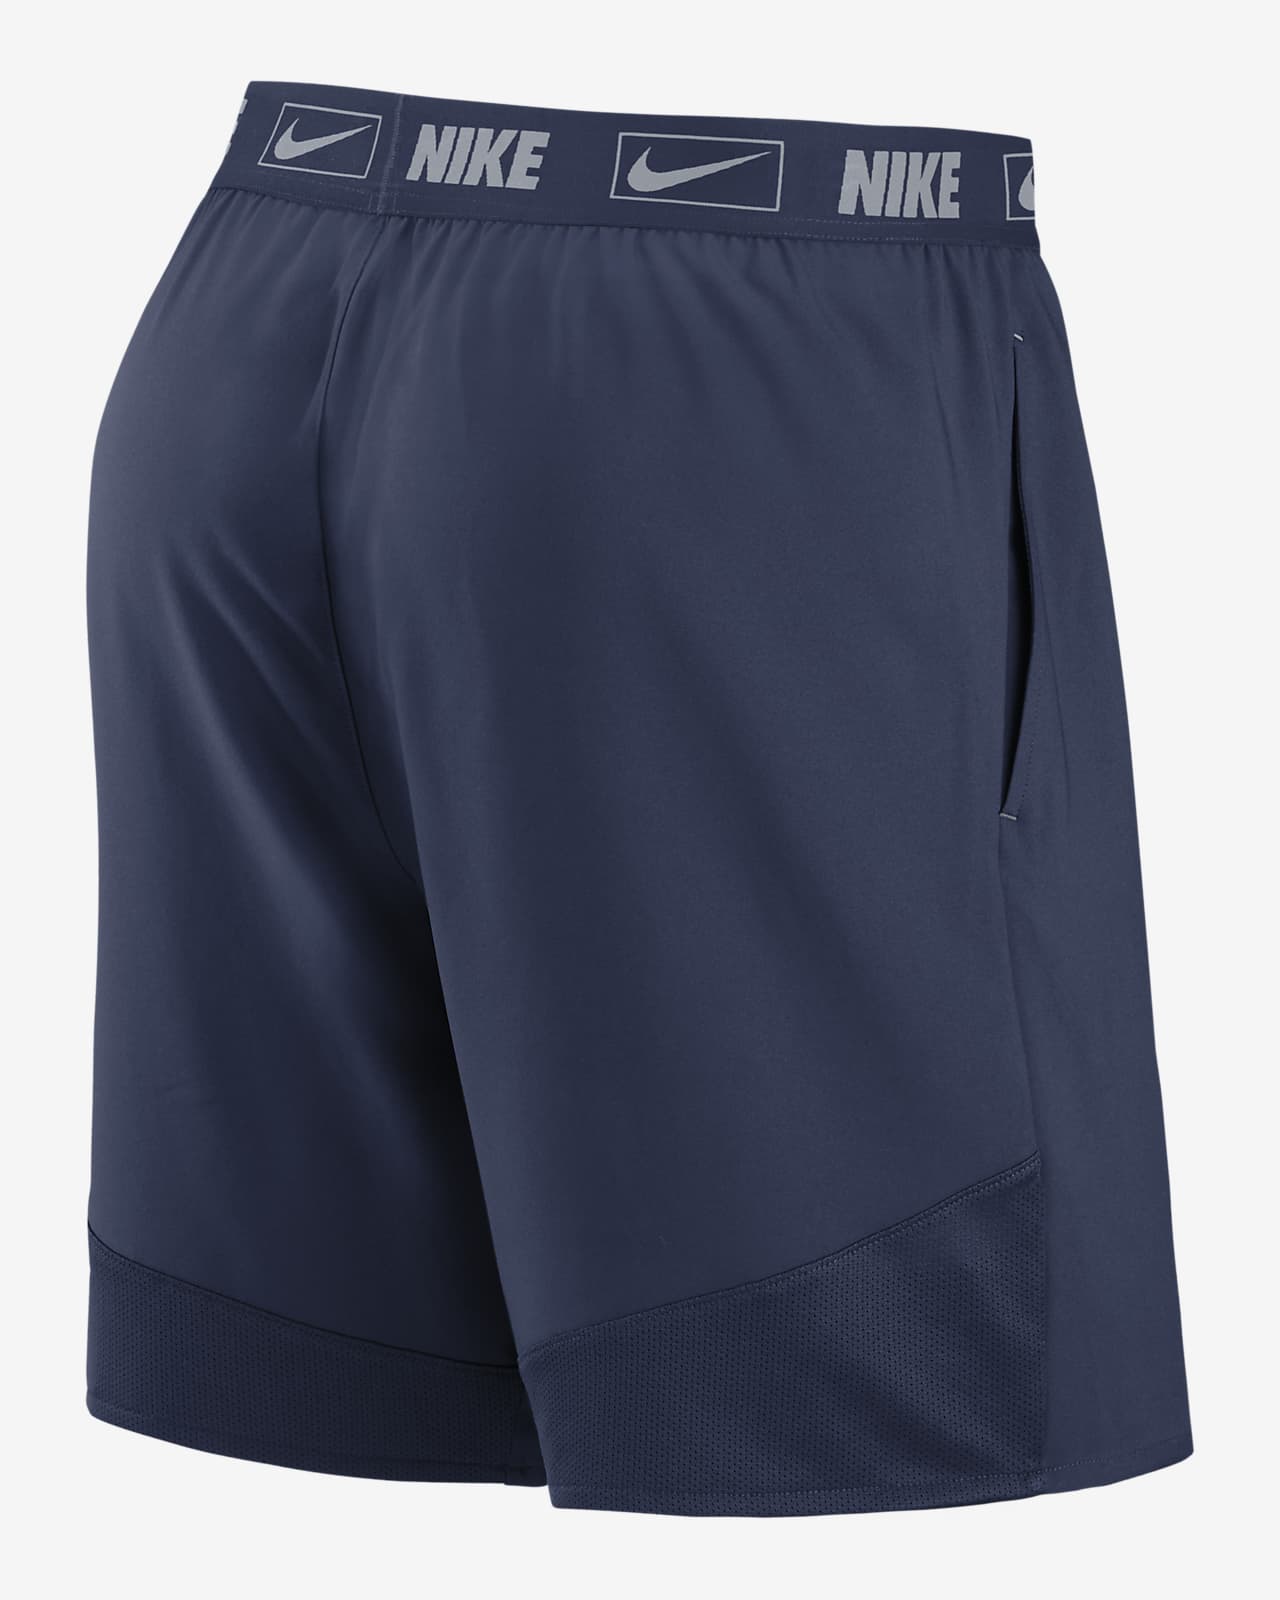 Nike Dri-FIT City Connect (MLB Chicago Cubs) Men's Shorts.